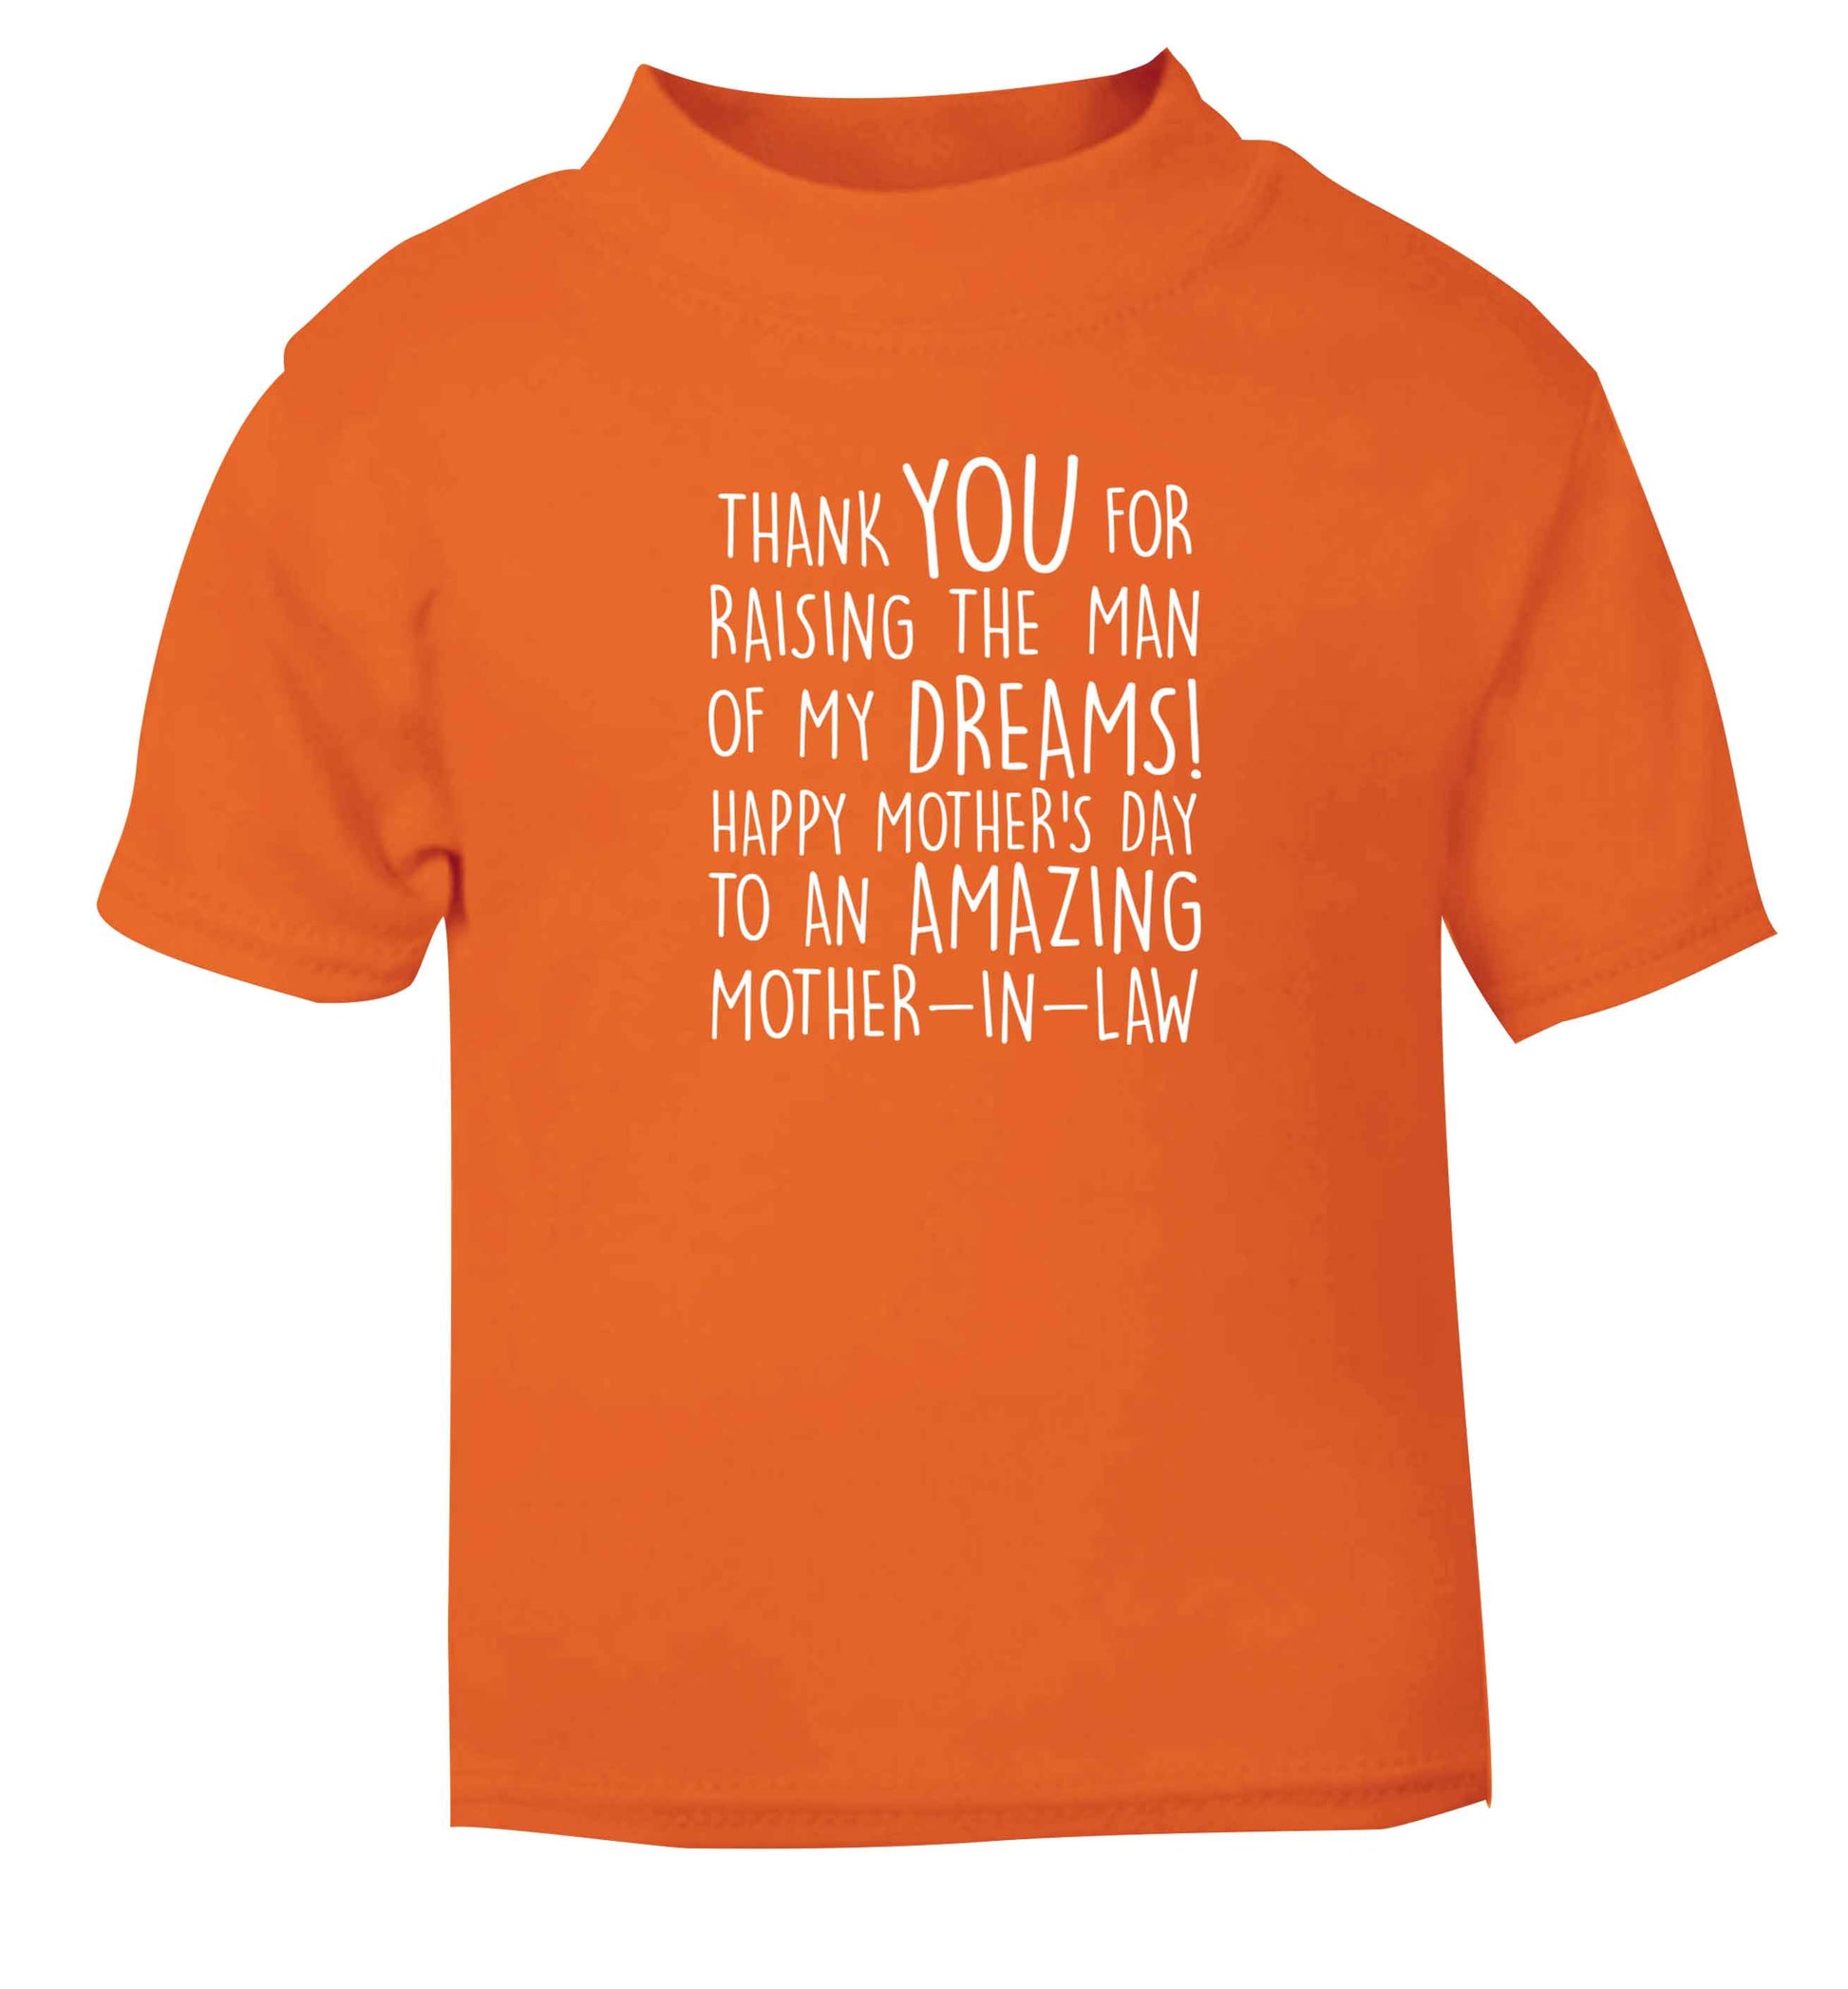 Raising the man of my dreams mother's day mother-in-law orange baby toddler Tshirt 2 Years